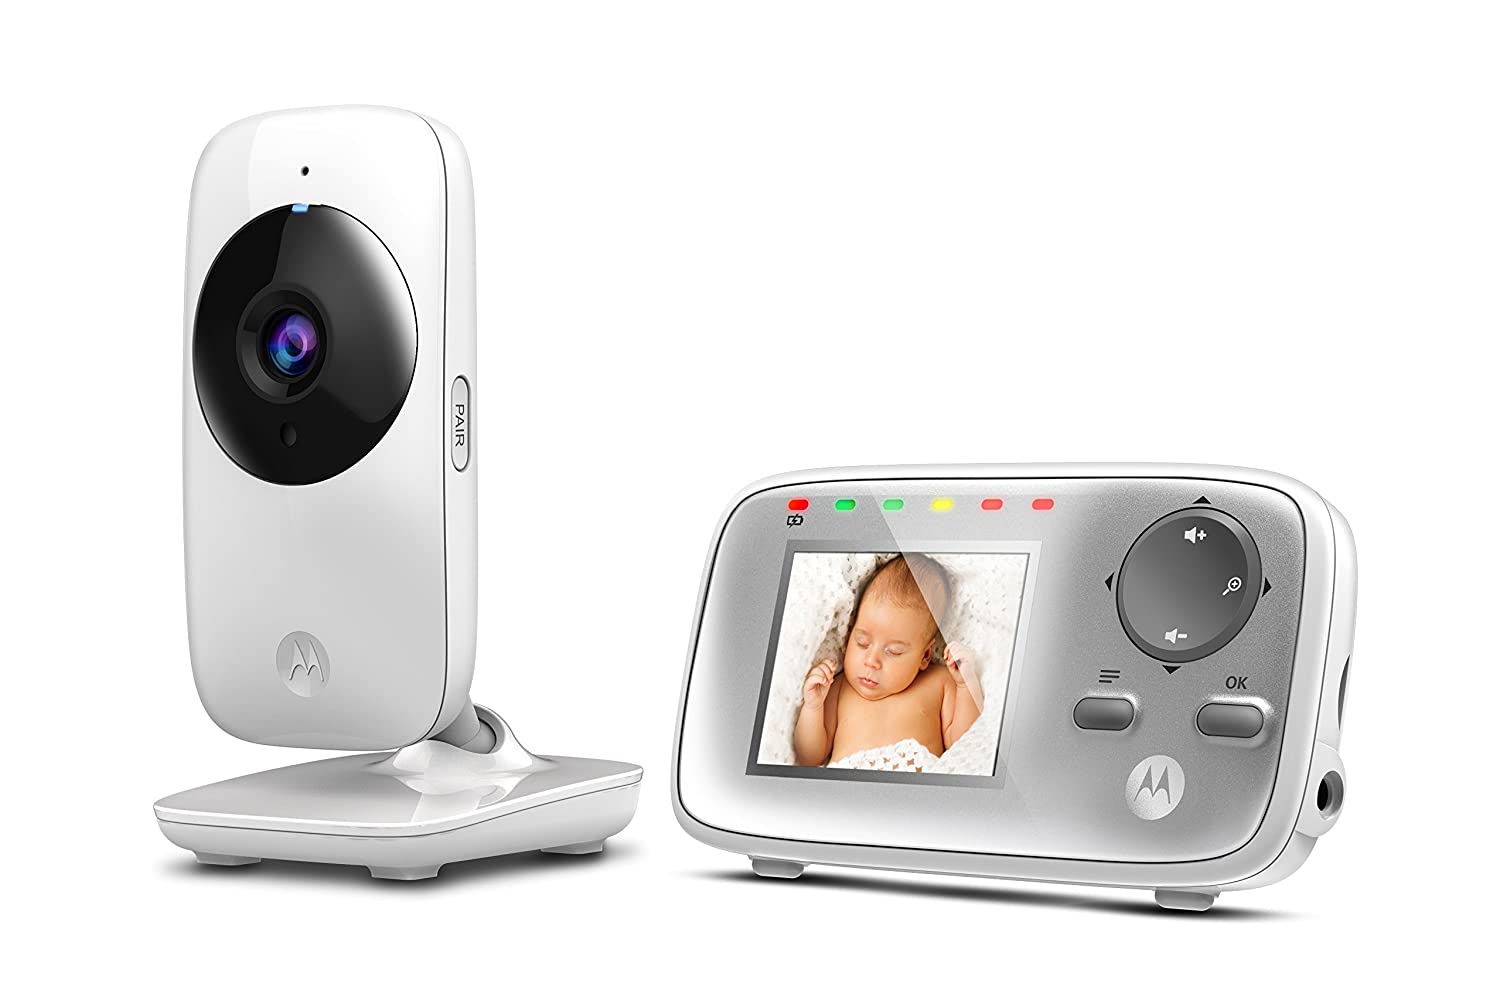 Motorola Baby MBP 482 Video Baby Monitor, Baby Surveillance Camera with Zoom, 2.4 Inch / 6.1 cm Colour Display, Infrared Night Vision and 300 Metre Range, White